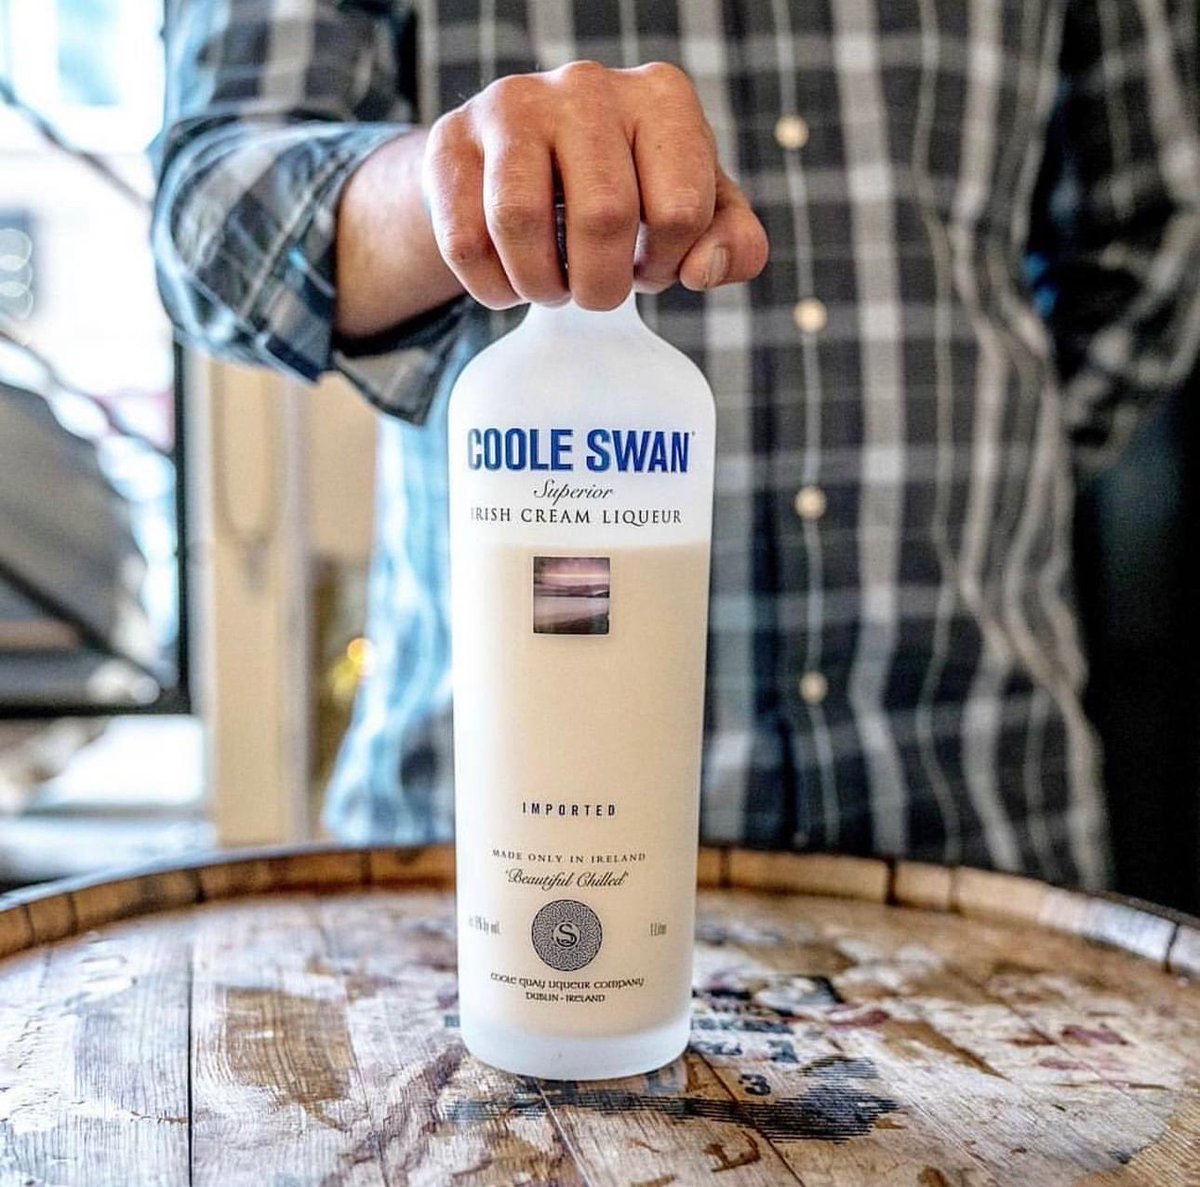 Congratulations @Coole_Swan who sponsor our Food and Drink Social Award on their win by @TastingTable as the best Irish Cream Liqueur. Real cream from a farm in Meath… 👌🏻👌🏻